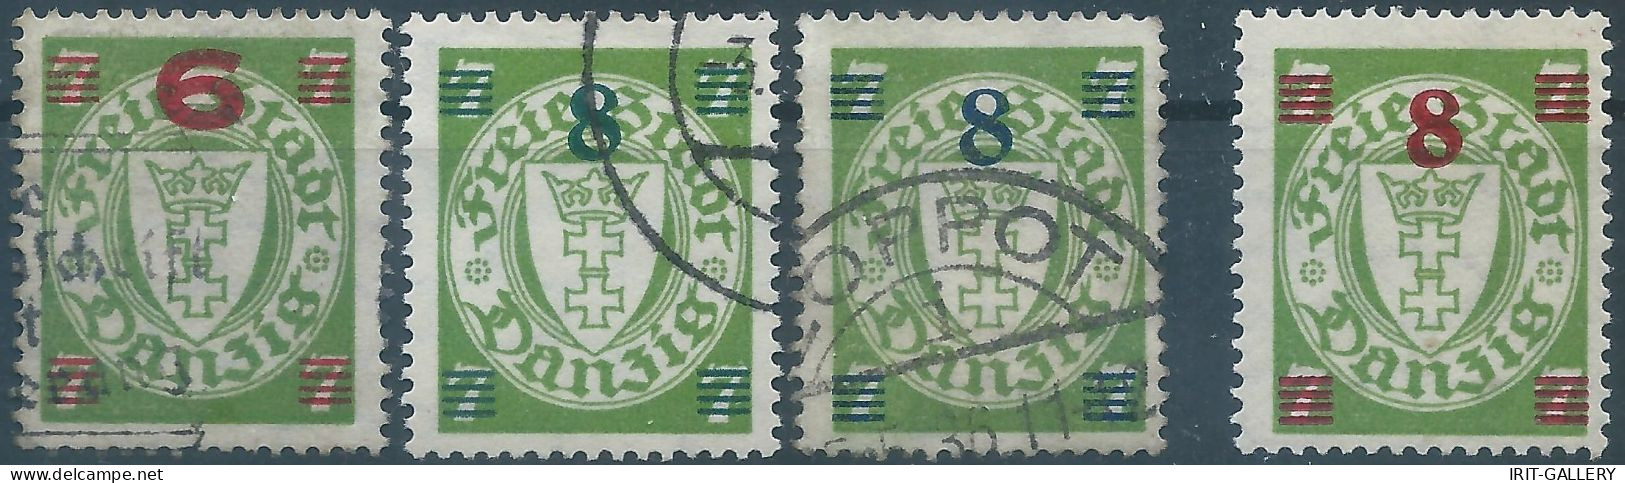 Germany-Deutschland,German Empire,Danzig 1934 -1936 Overprints On Coat Of Arms,Used & 8/7 Pfg, Red Overprint Is MNH - Used